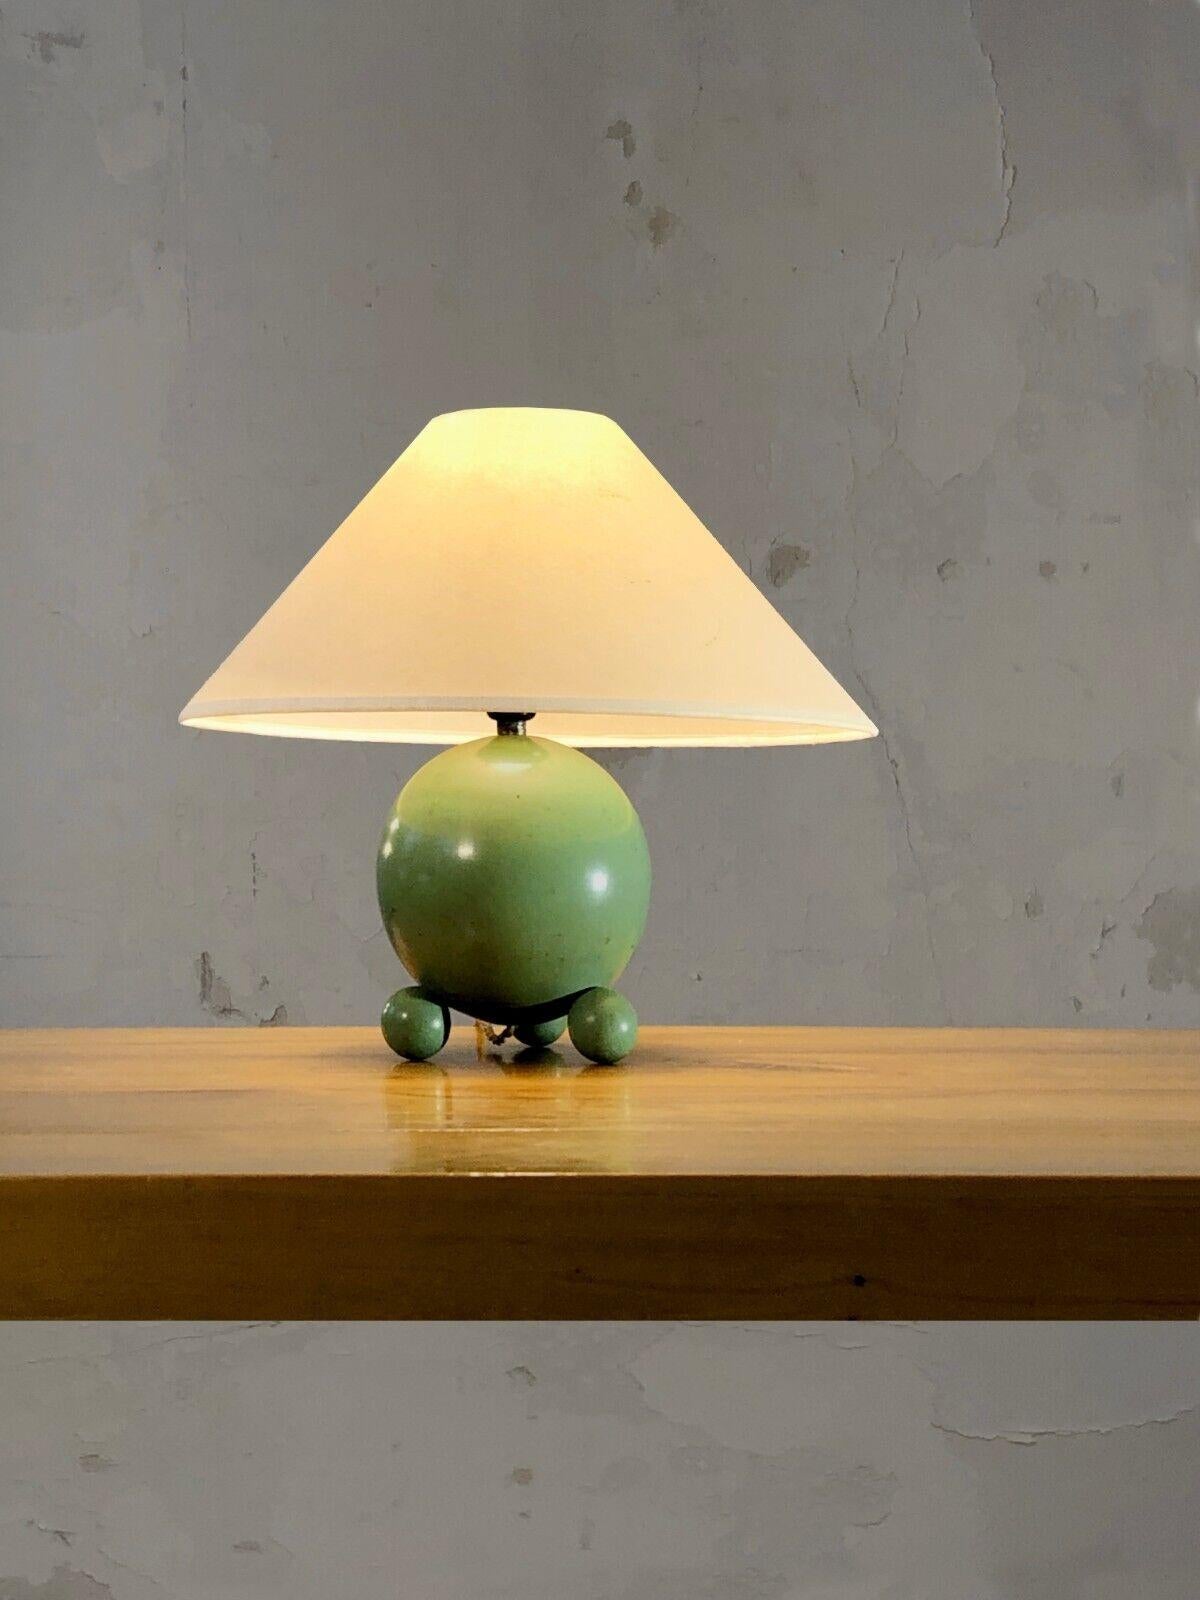 A rigorous spherical table lamp, Art-Deco, Modernist, Bauhaus, a sphere placed on 3 balls in celadon green lacquered solid wood, under a conical lampshade, to be attributed, France 1920-1930.

DIMENSIONS: H 26 x D 30 cm with lampshade in photo
Base